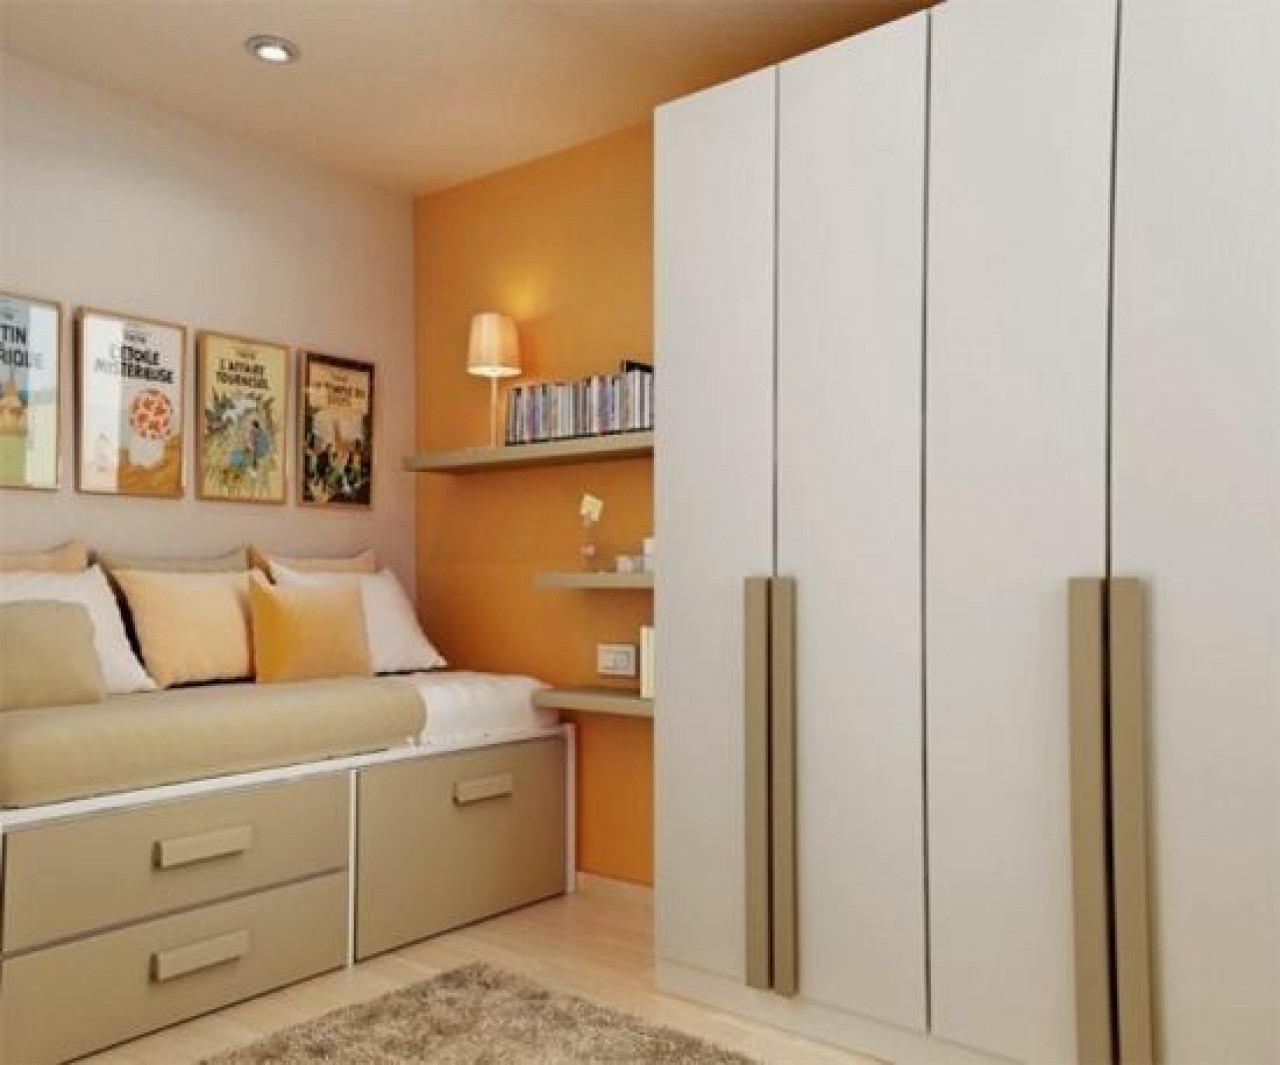 Small Space Bedroom Furniture
 11 Most Possible Bedroom Furniture Ideas for Small Spaces